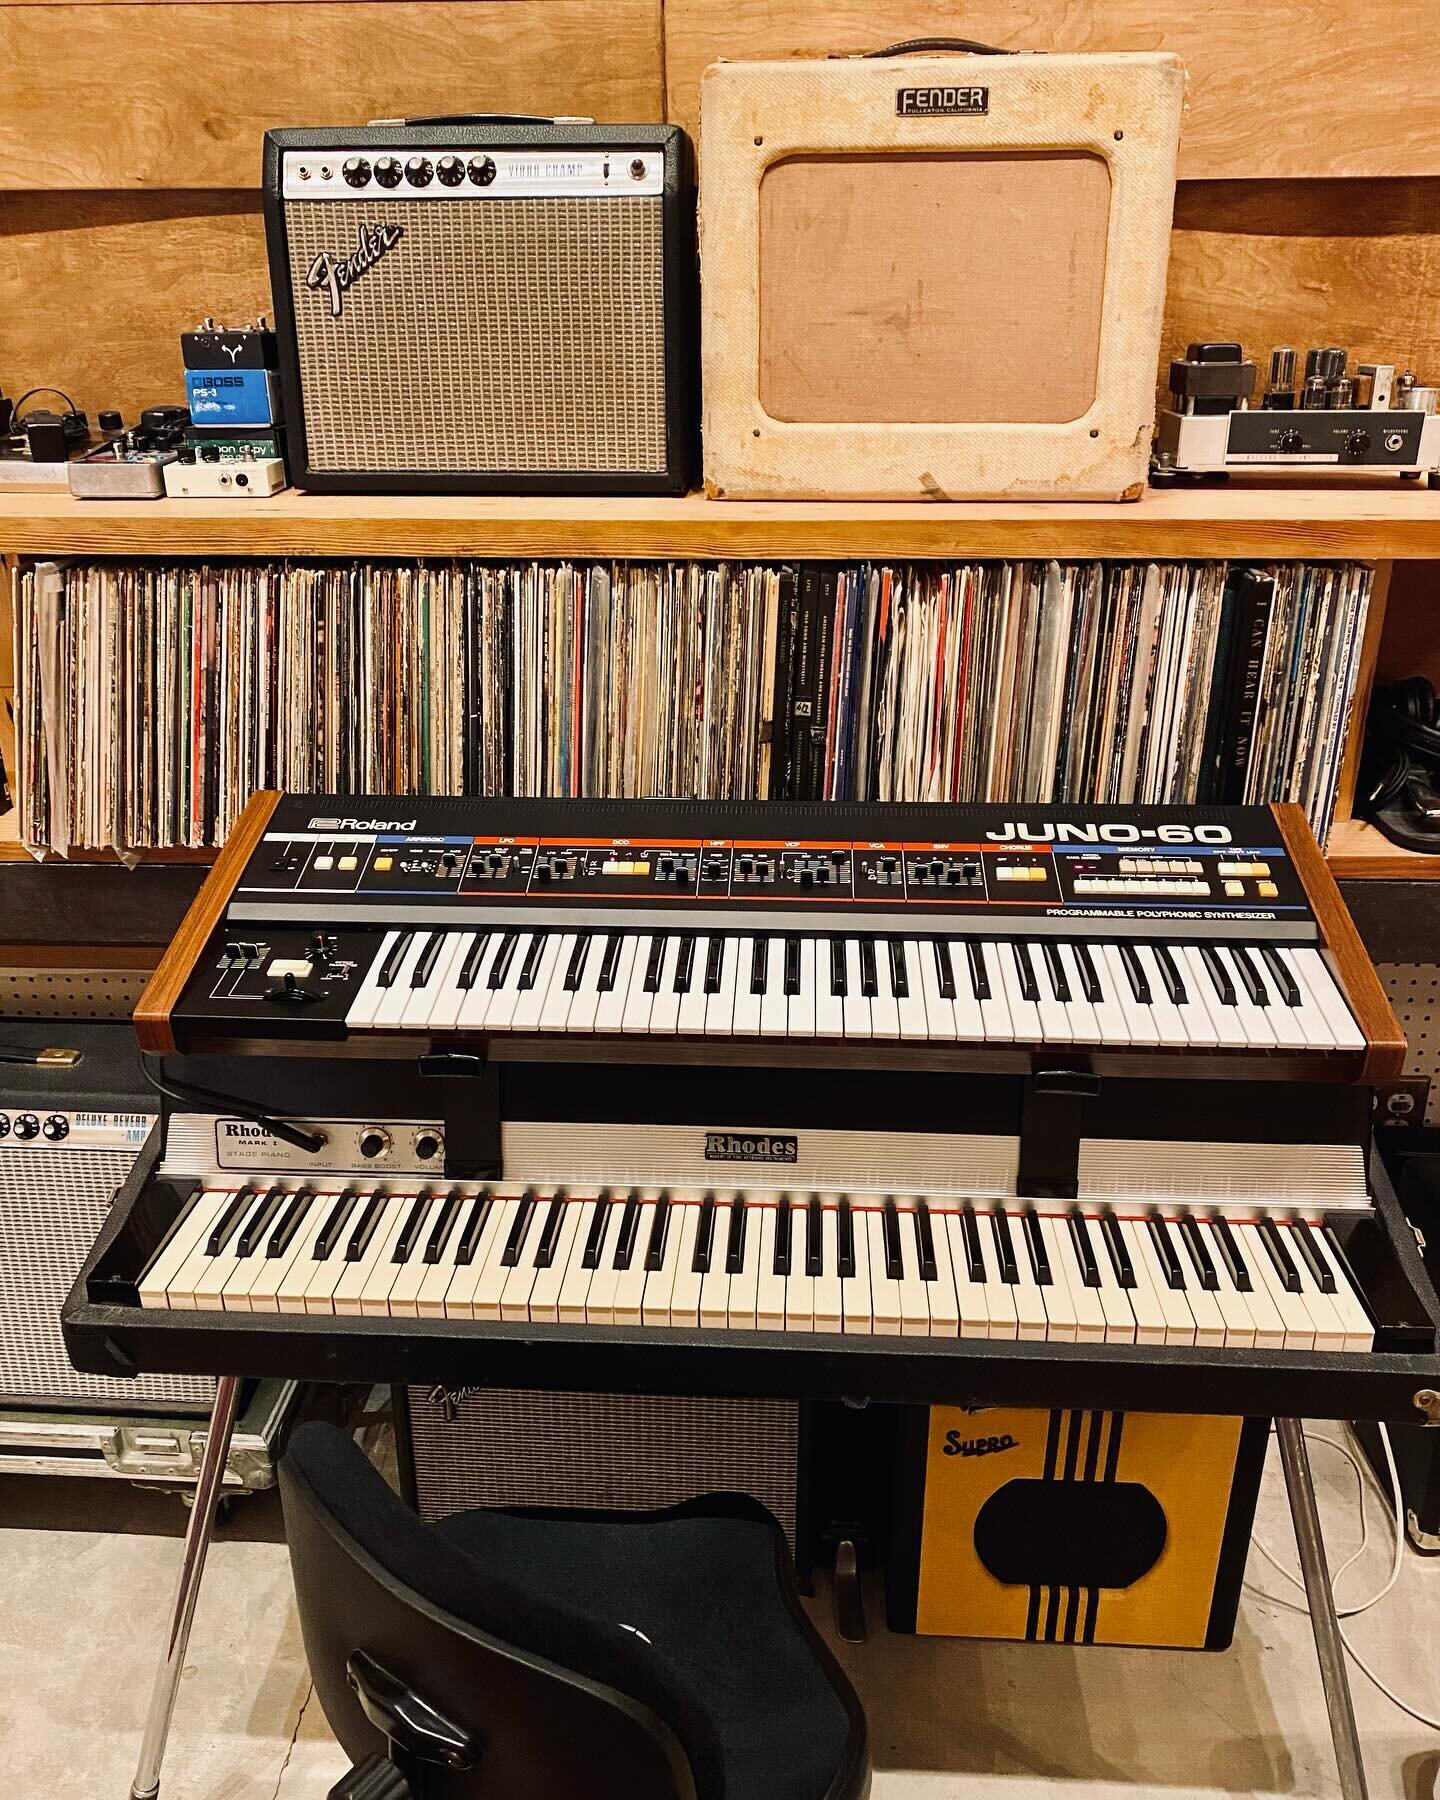 Recording can be an experience, not just a means to an end. Come flip through pre-sets, tone knobs, pedals, amps, vinyl, or all of the above&hellip; #makerecords
#IRL  #juno60 #rhodes #vintage #analog. #stonesoup